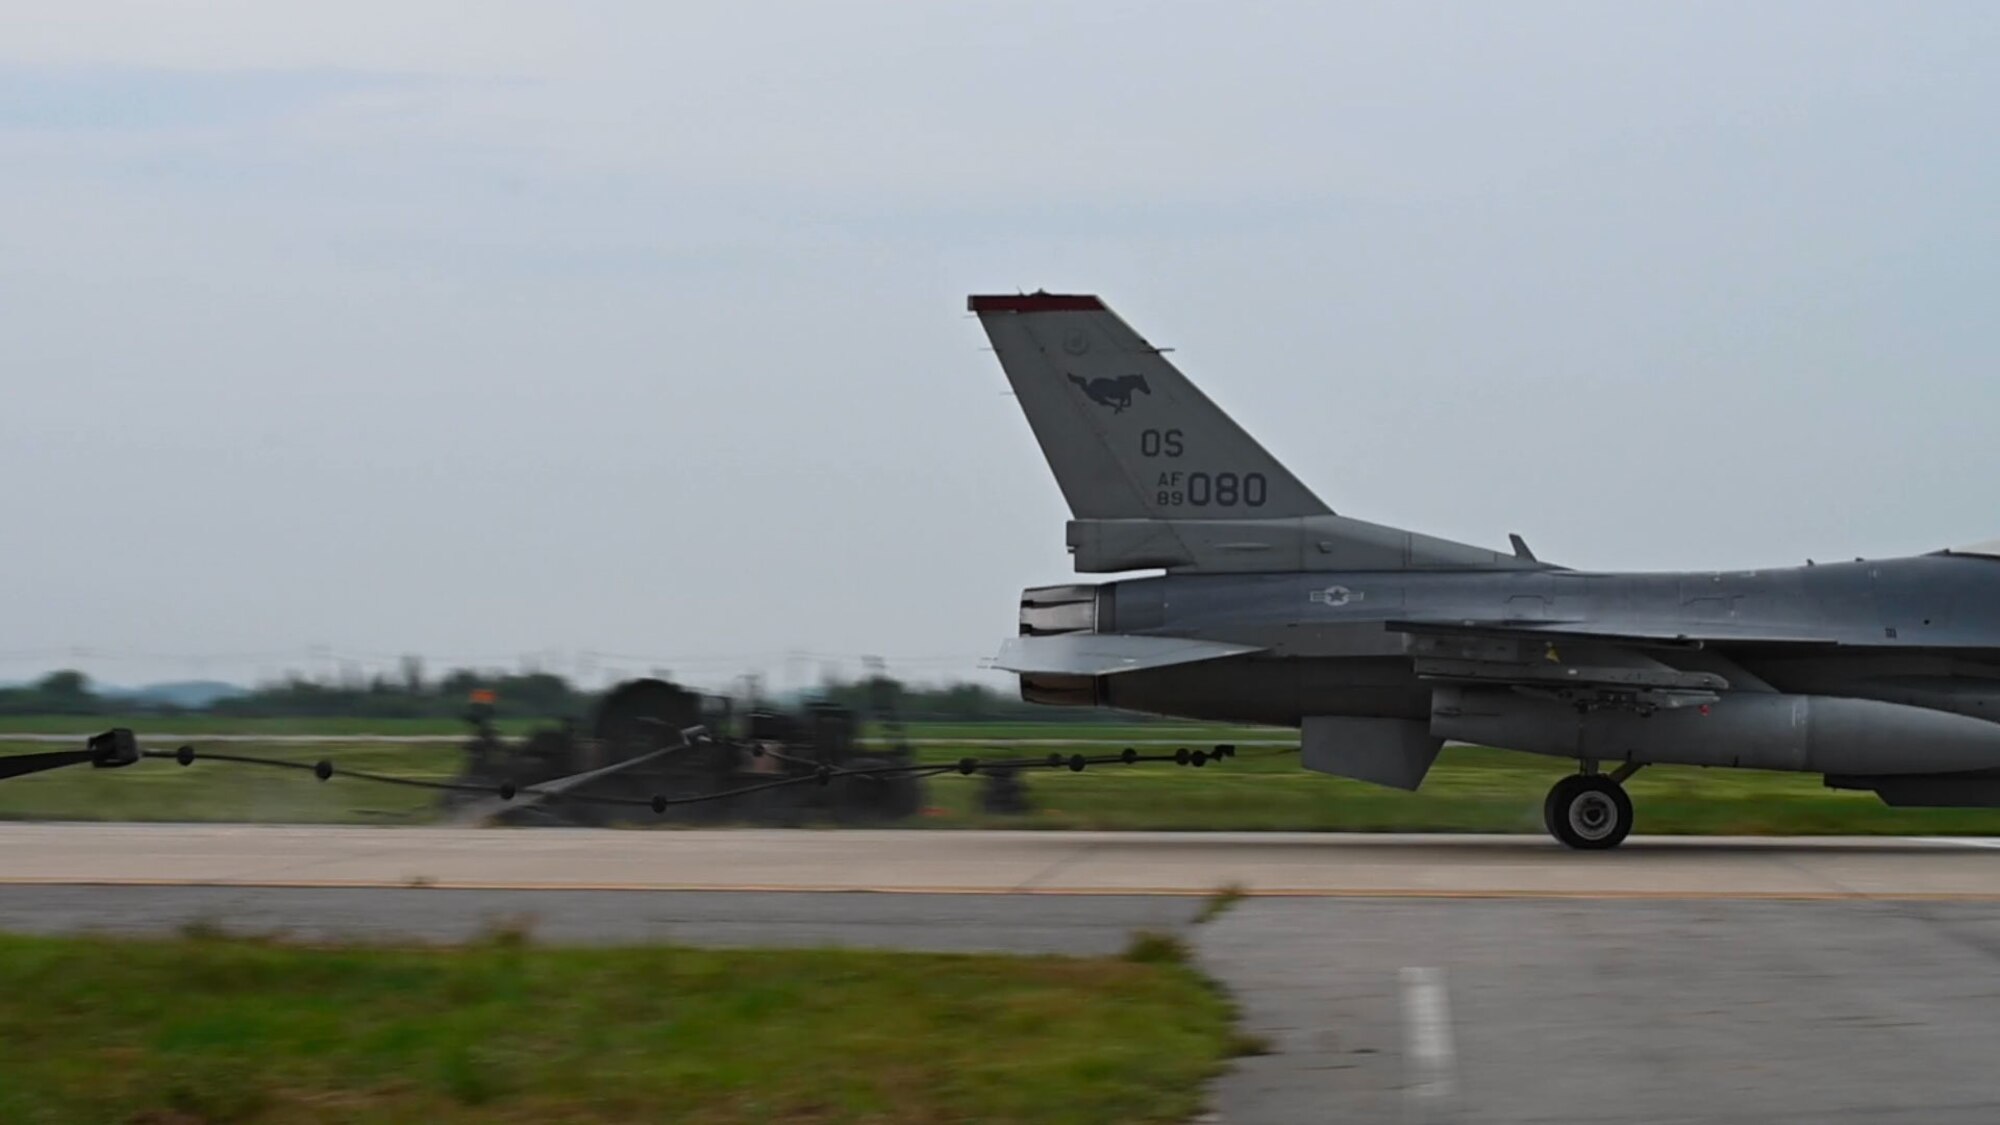 The F-16 tested the MAAS’ functionality by taxiing at a highspeed and latching on to the system causing the aircraft to come to a complete stop.